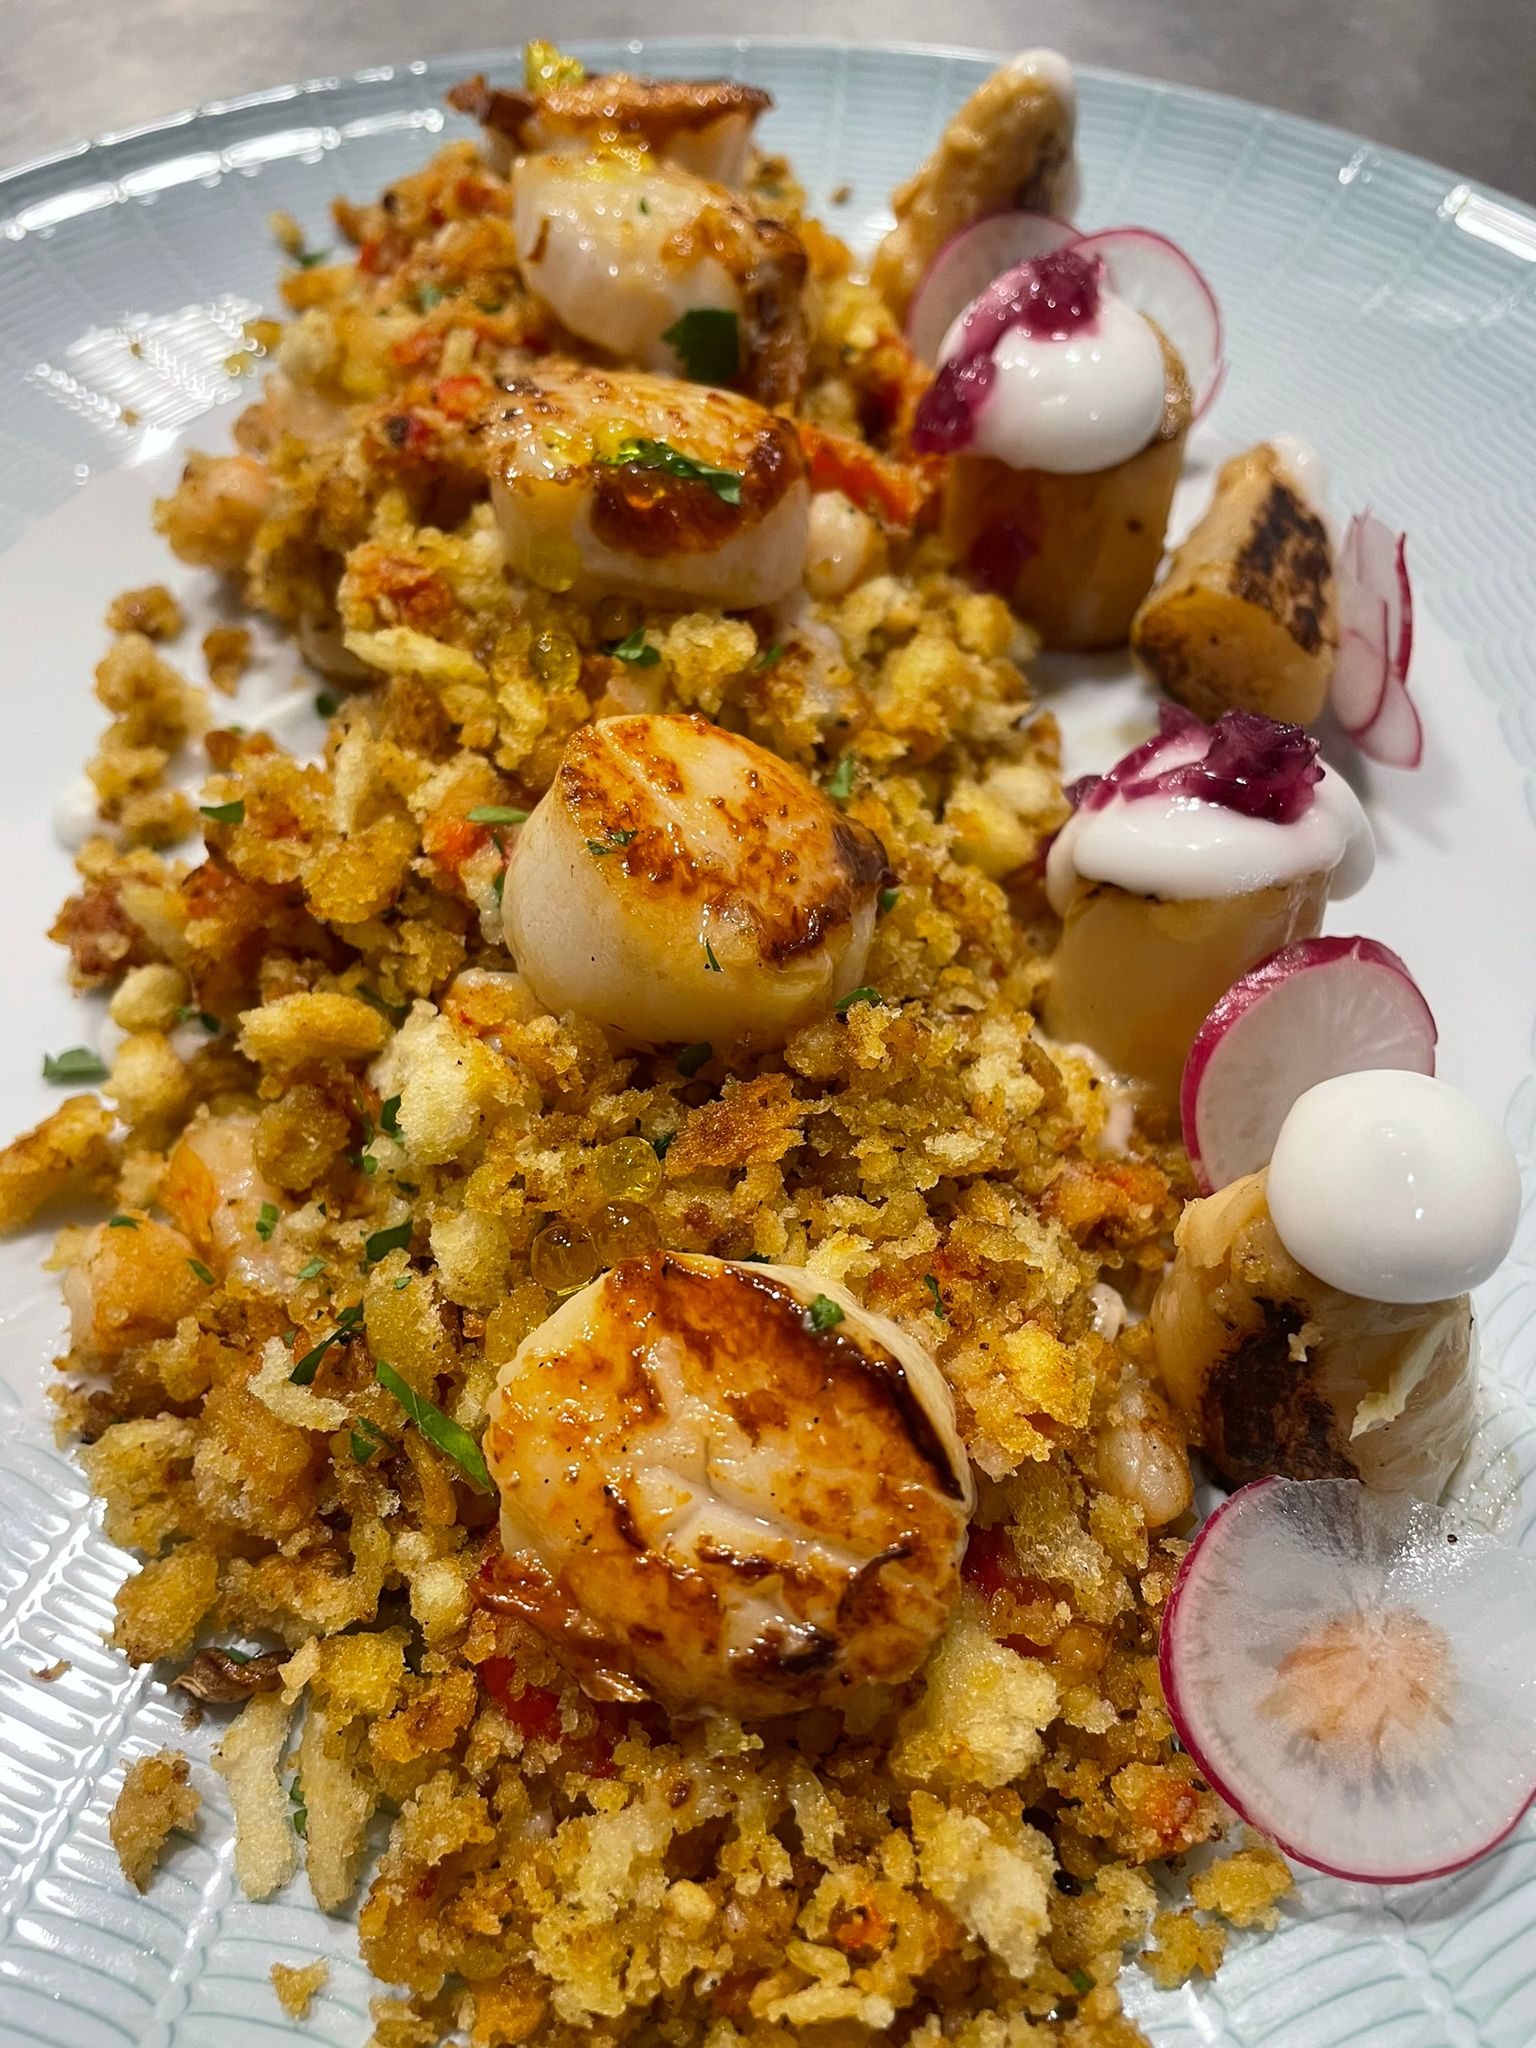 Grilled scallops with crumbs